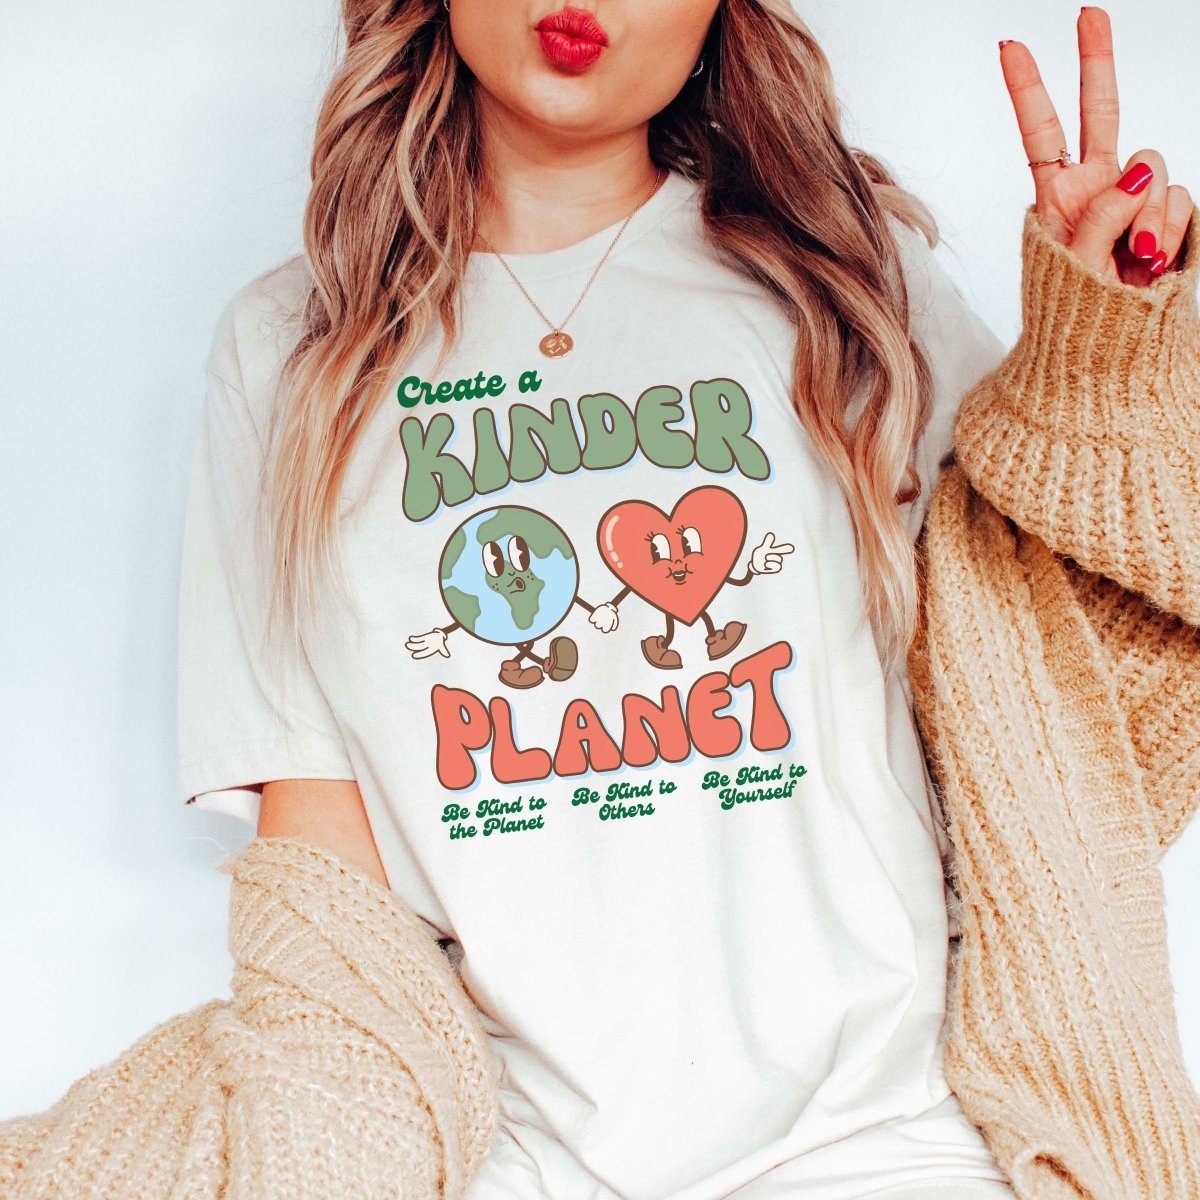 Create a kinder planet Earth and Heart Comfort Color Wholesale Tee - Limeberry Designs